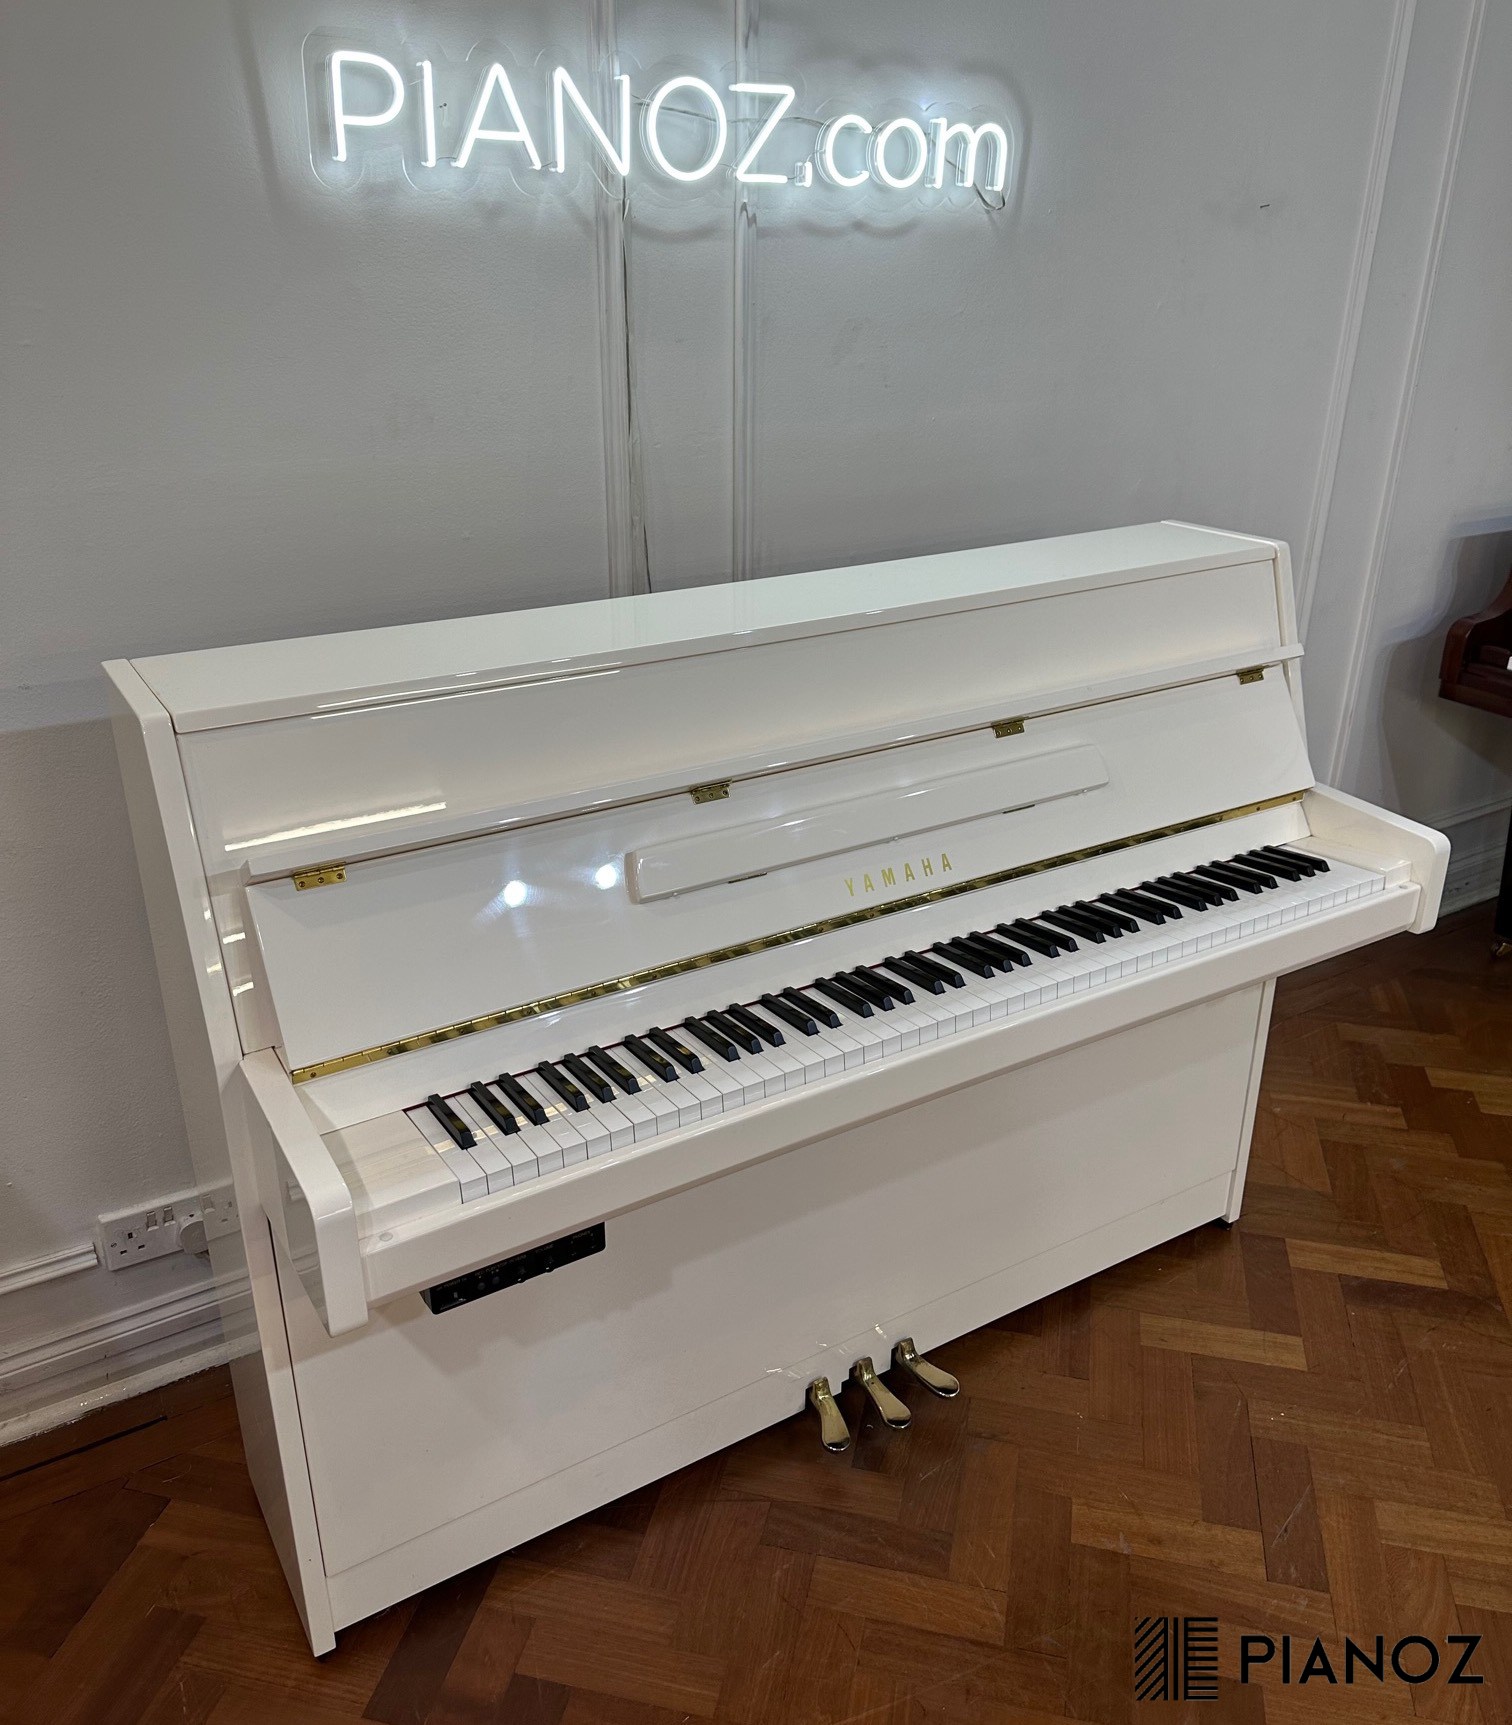 Yamaha B1 Silent White Upright Piano piano for sale in UK